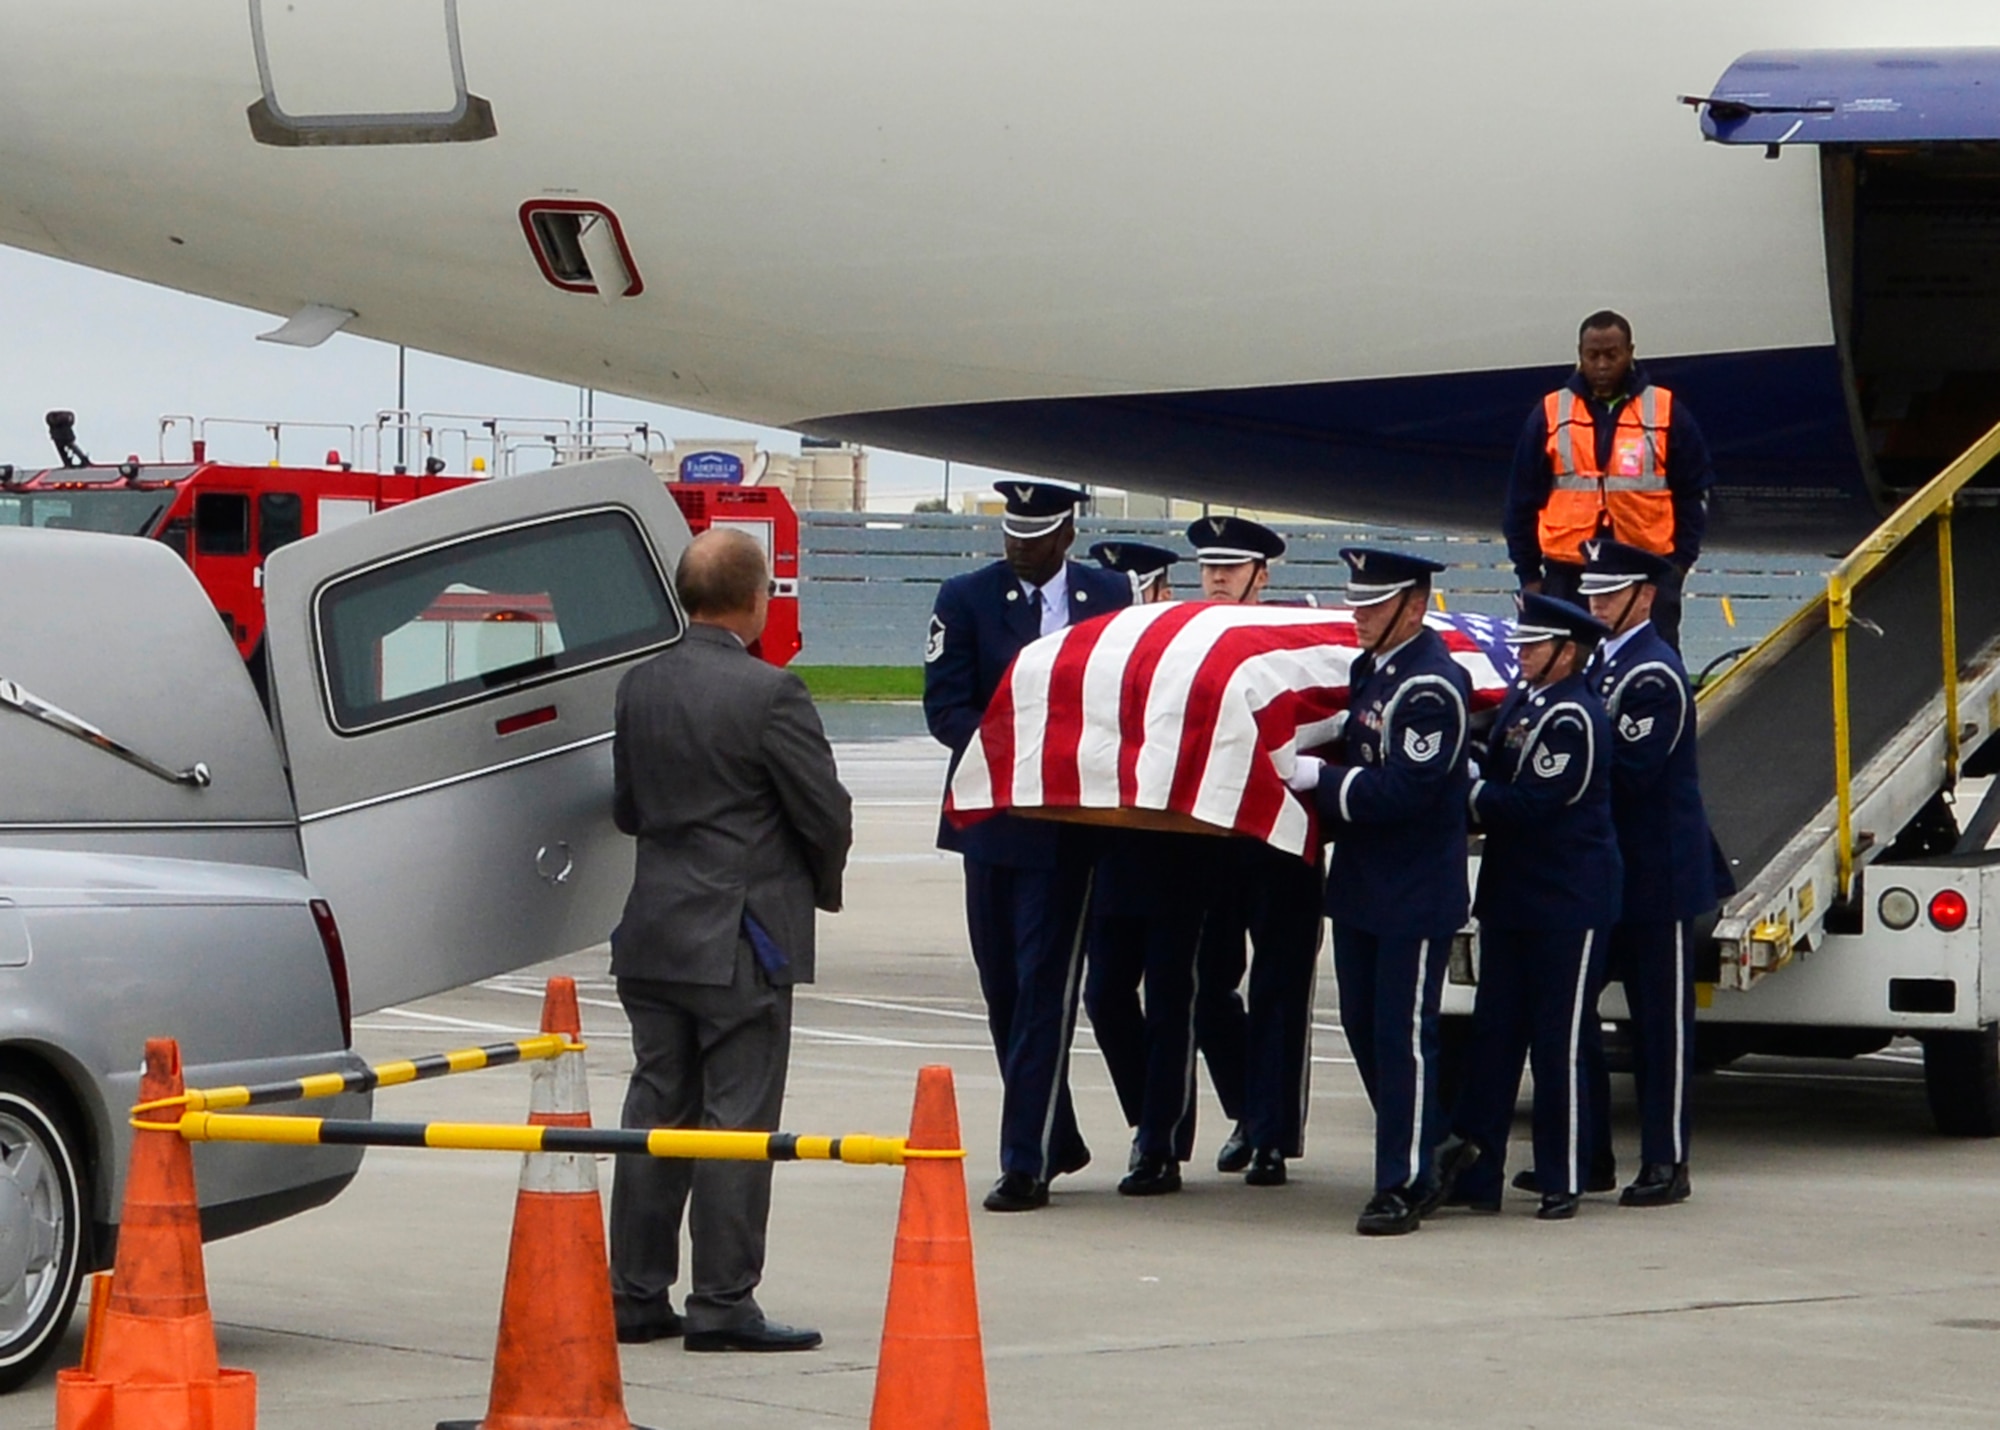 The Niagara Falls Air Reserve Station Honor Guard conducts a dignified arrival of U.S. Air Force 1st Lt. William Irving Turner at the Buffalo Niagara International Airport, Buffalo, N.Y., September 18, 2014. Irving was onboard a C-124 Globemaster aircraft that crashed on Nov. 22, 1952, while en route to Elmendorf Air Force Base, Alaska, from McChord Air Force Base, Wa. A military escort remained with Turner to his hometown of Coudersport, Pa. (U.S. Air Force photo by Staff Sgt. Stephanie Sawyer)